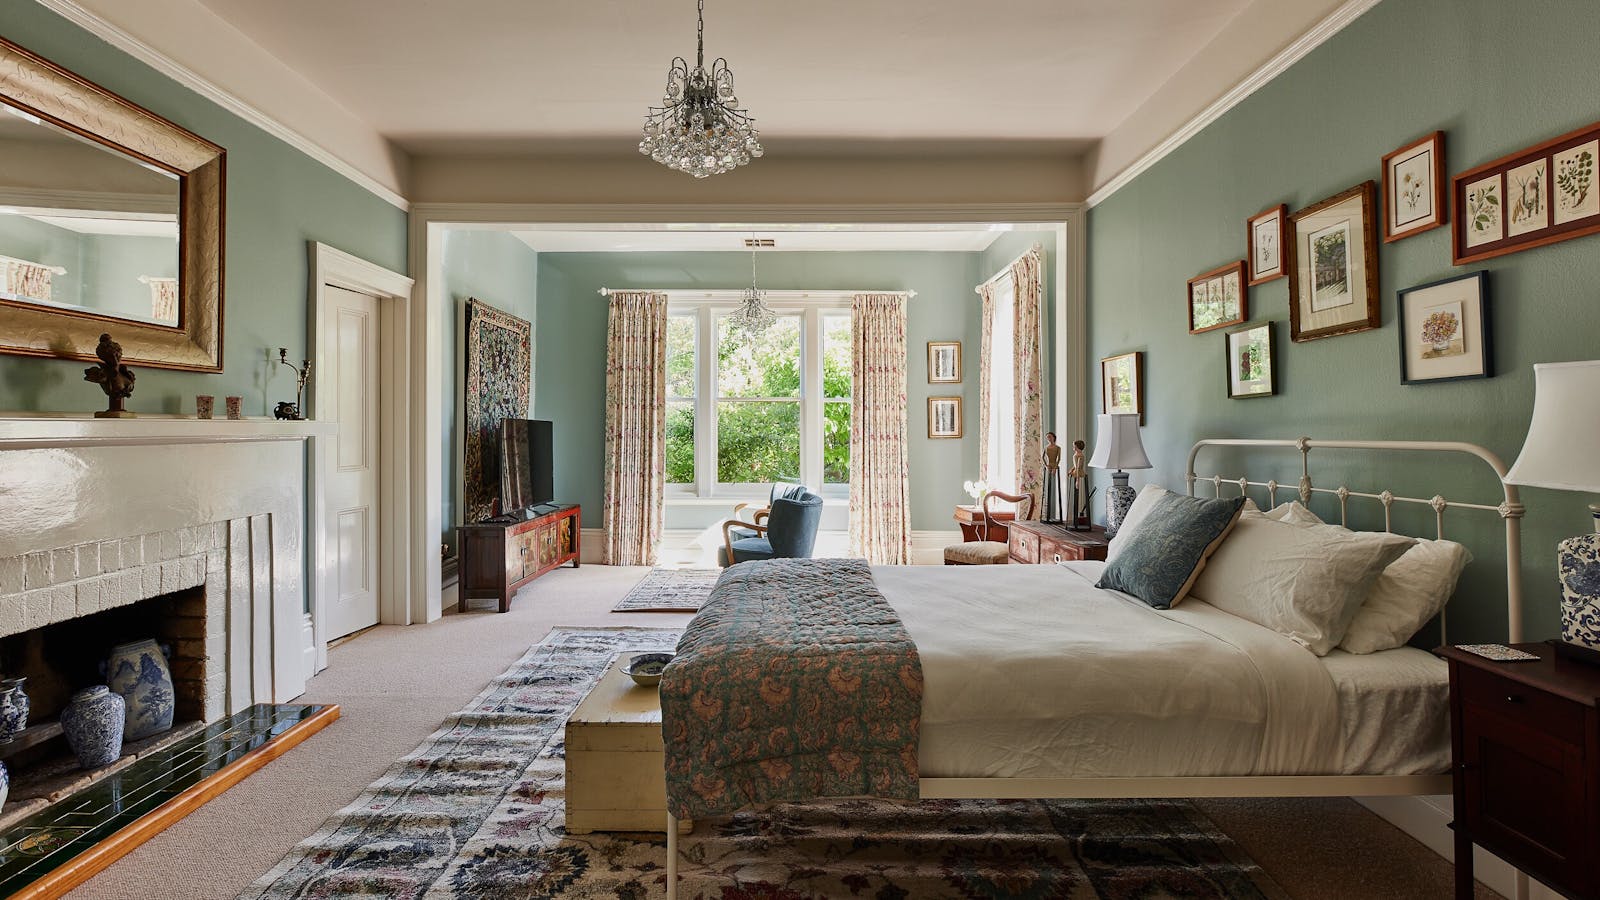 The Brameley Suite offers a harmonious blend of period features and contemporary amenities.